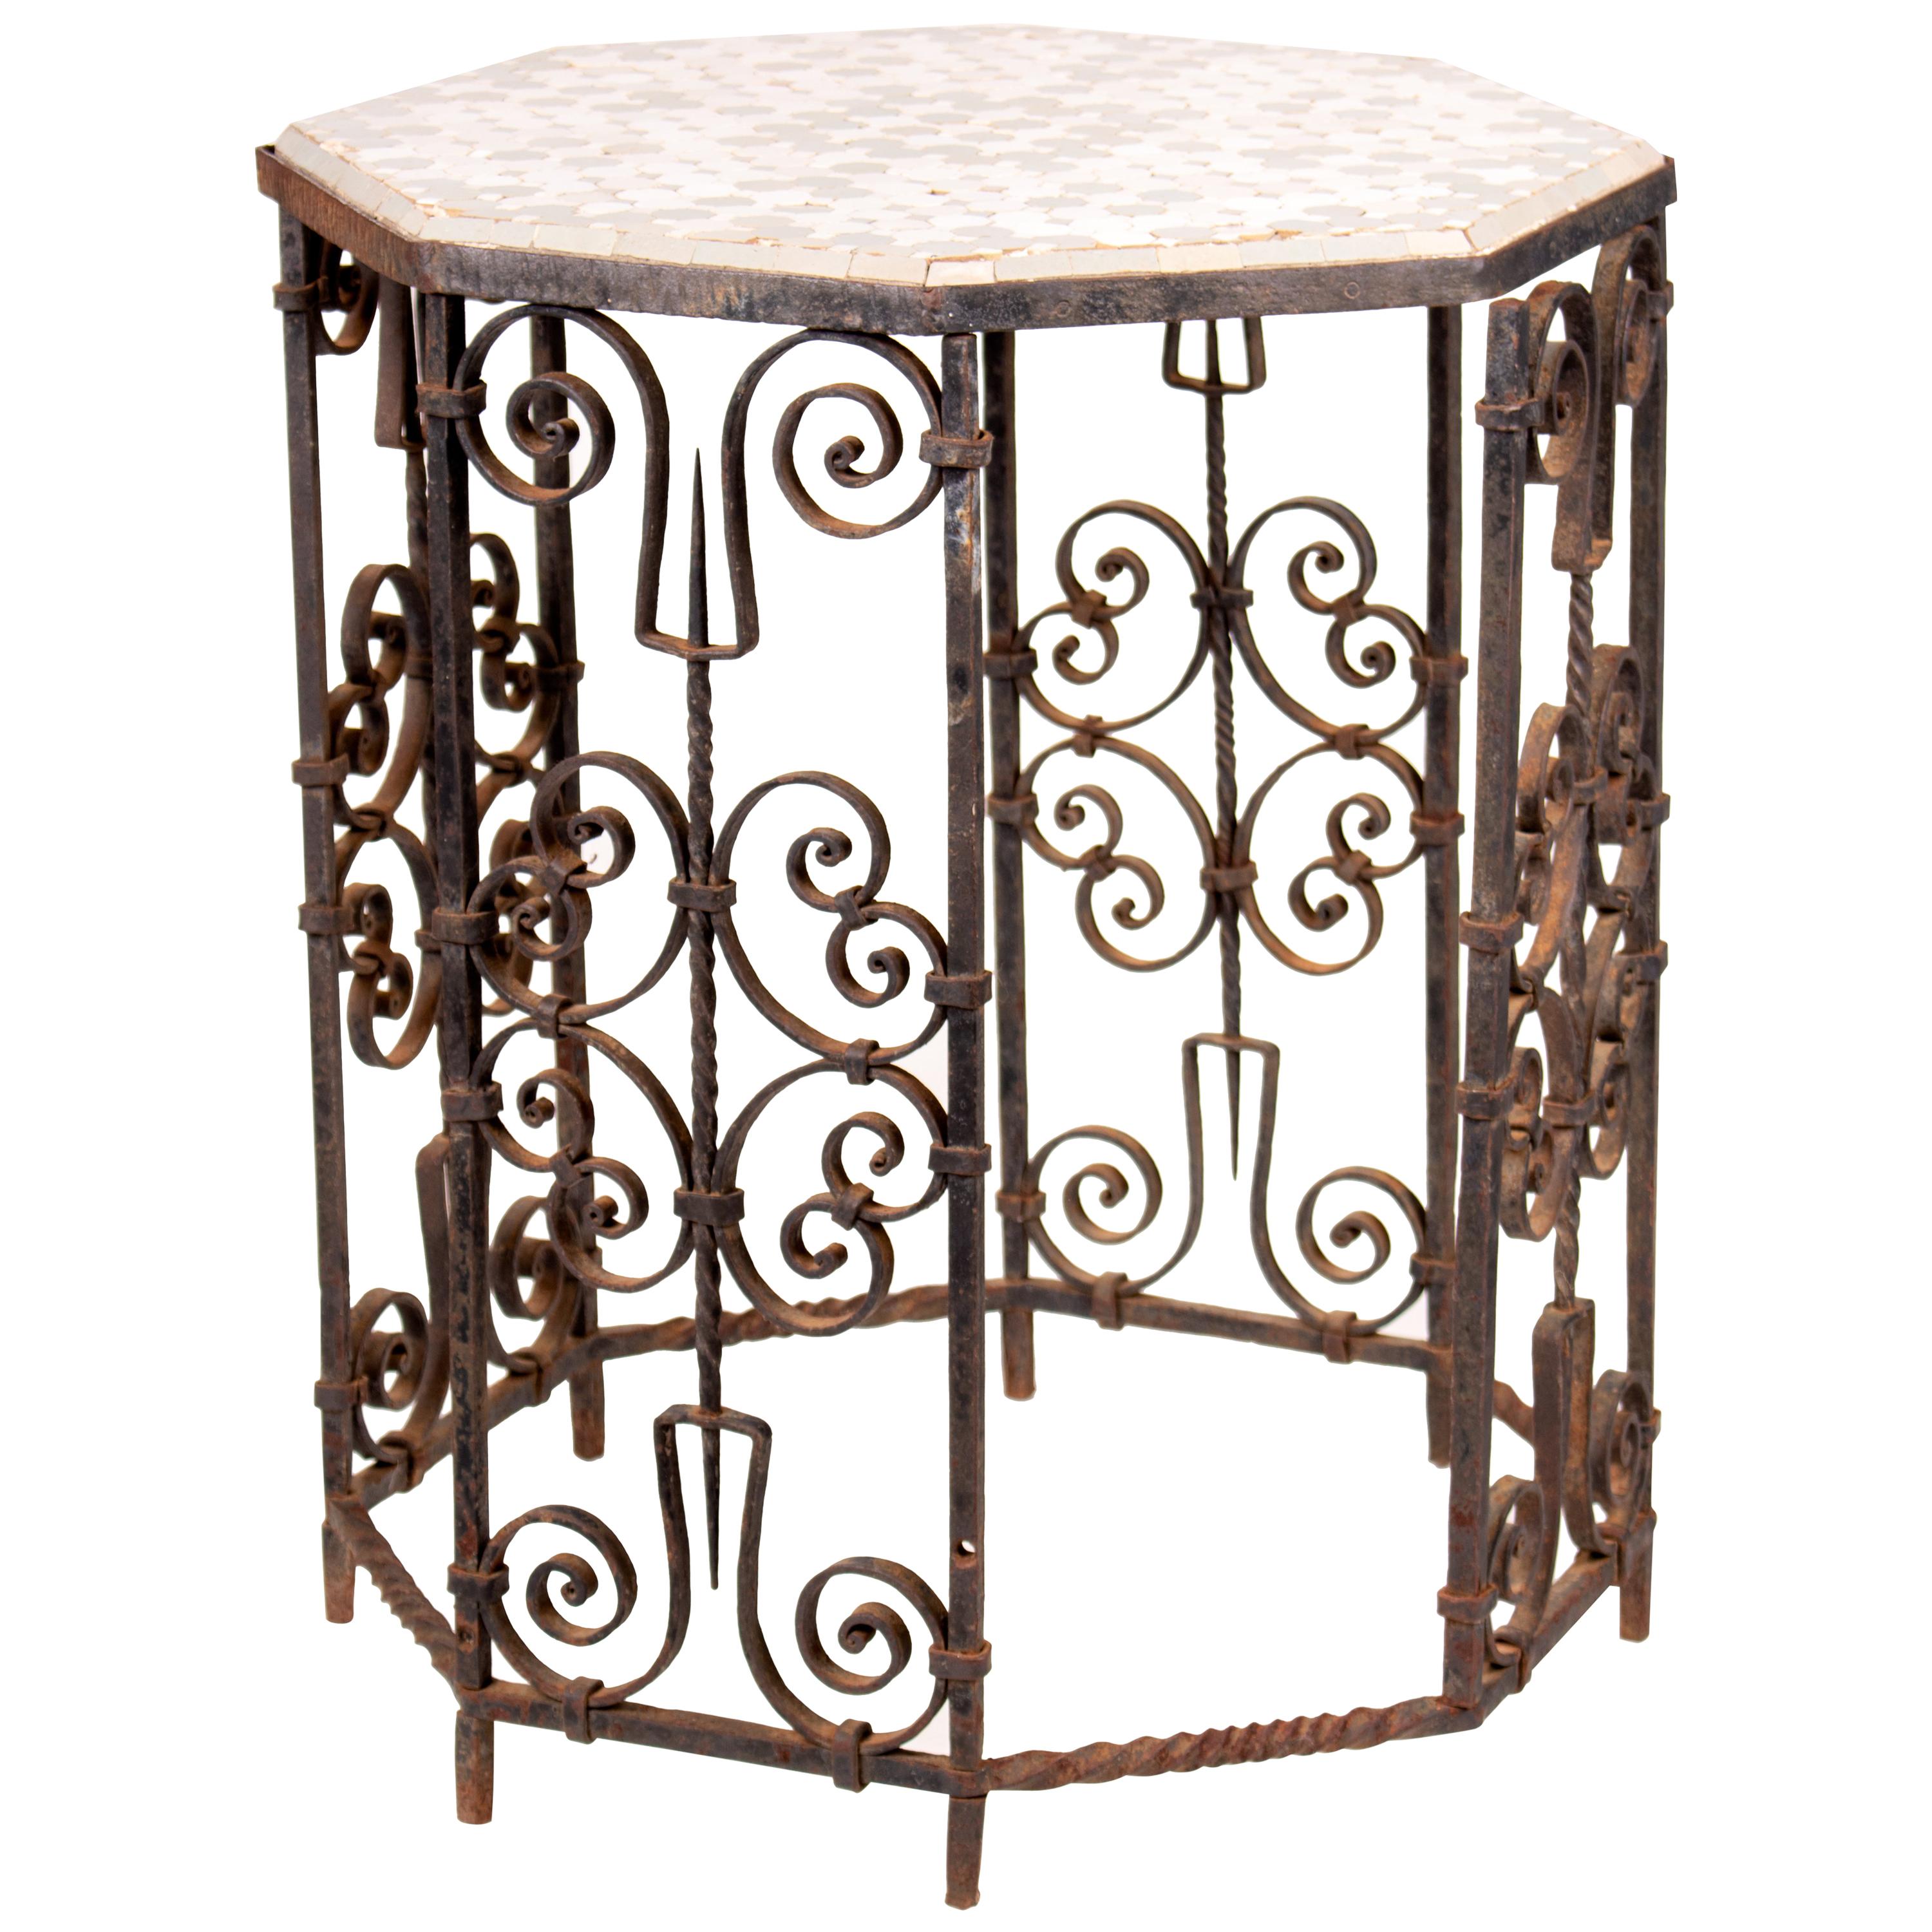 19th Century French Wrought Iron Octagonal Ceramic Top Table